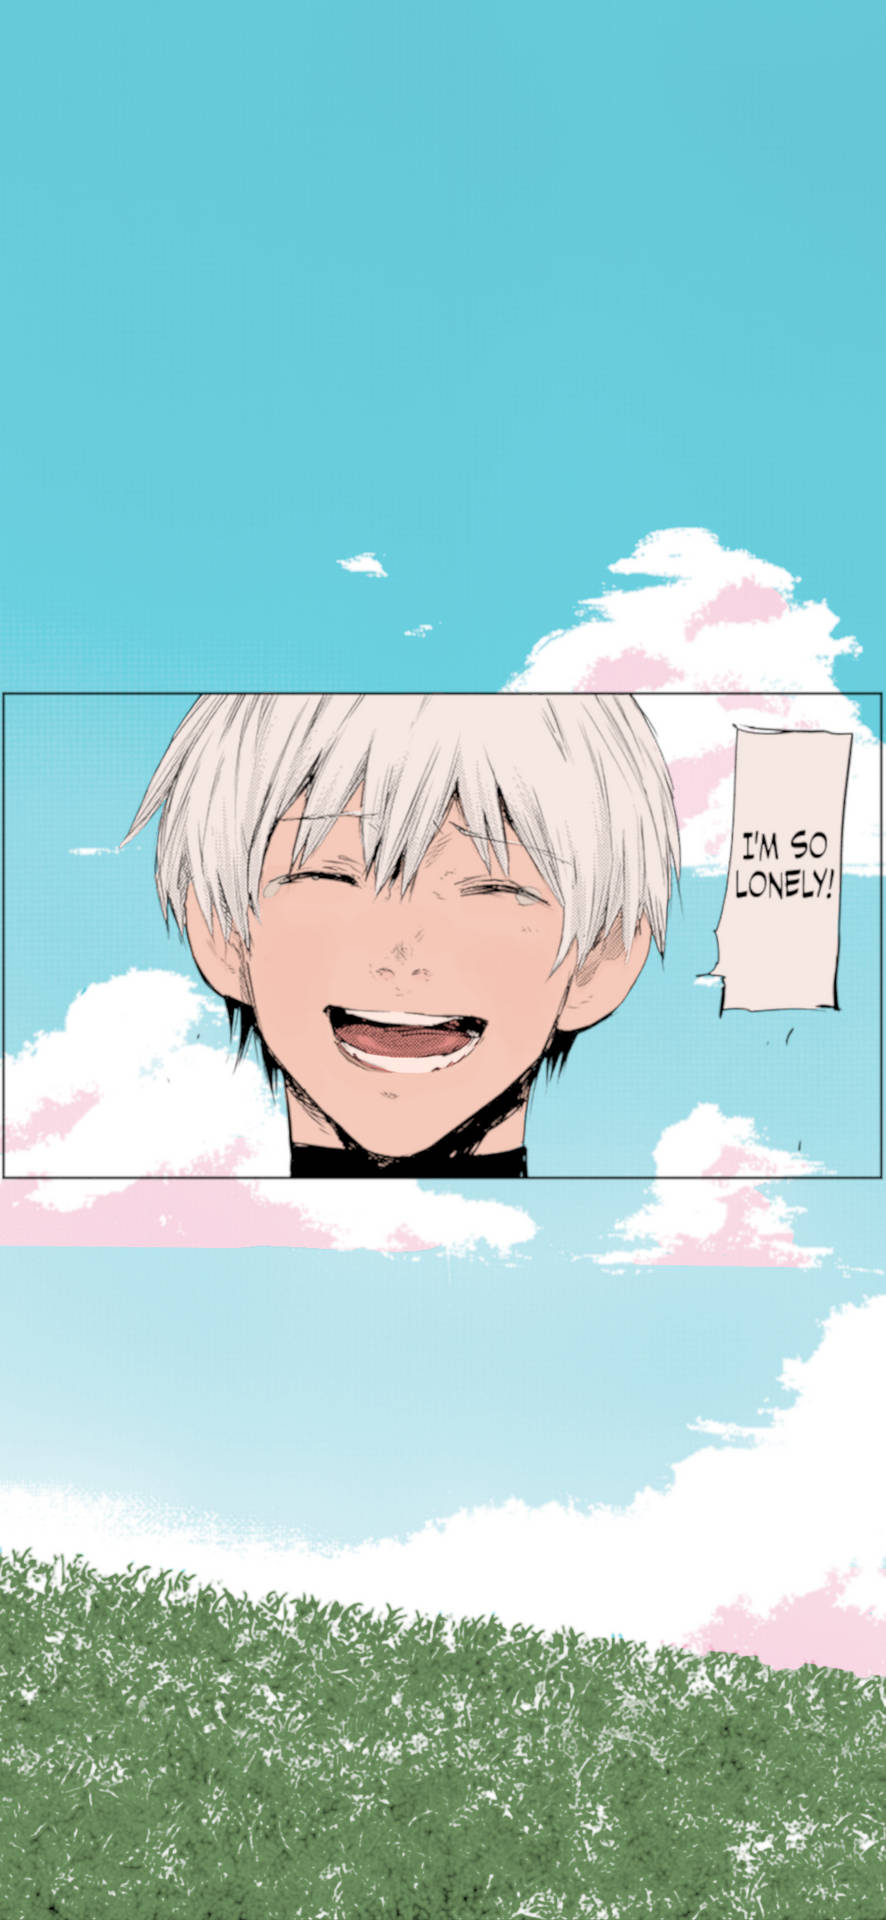 Tokyo Ghoul Aesthetic With Morbid Humour Wallpaper